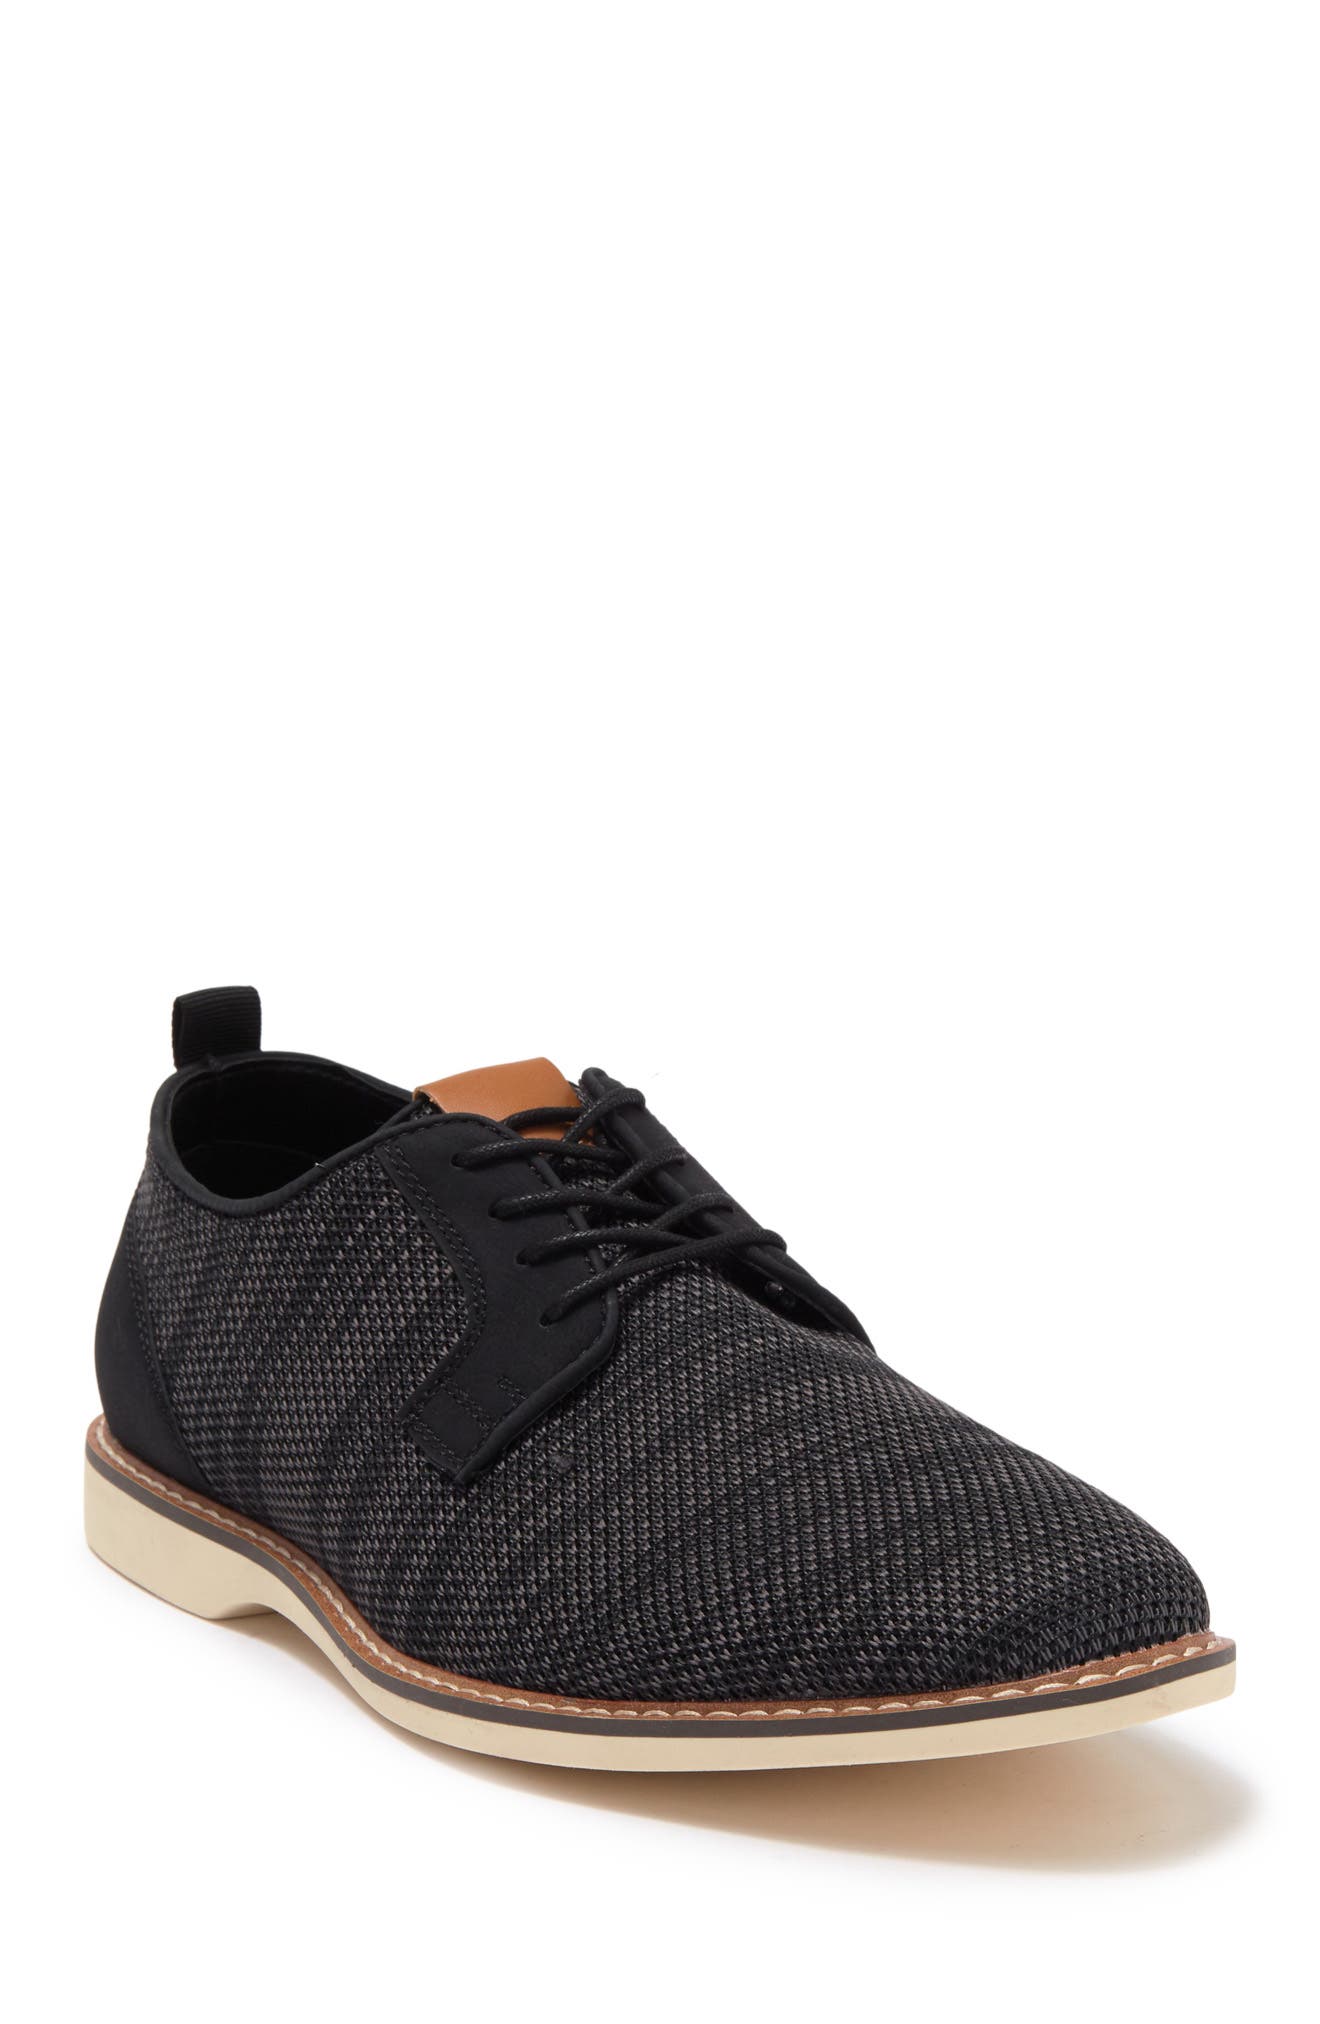 Abound Sheridan Knit Lace-up Derby In Black Knit | ModeSens